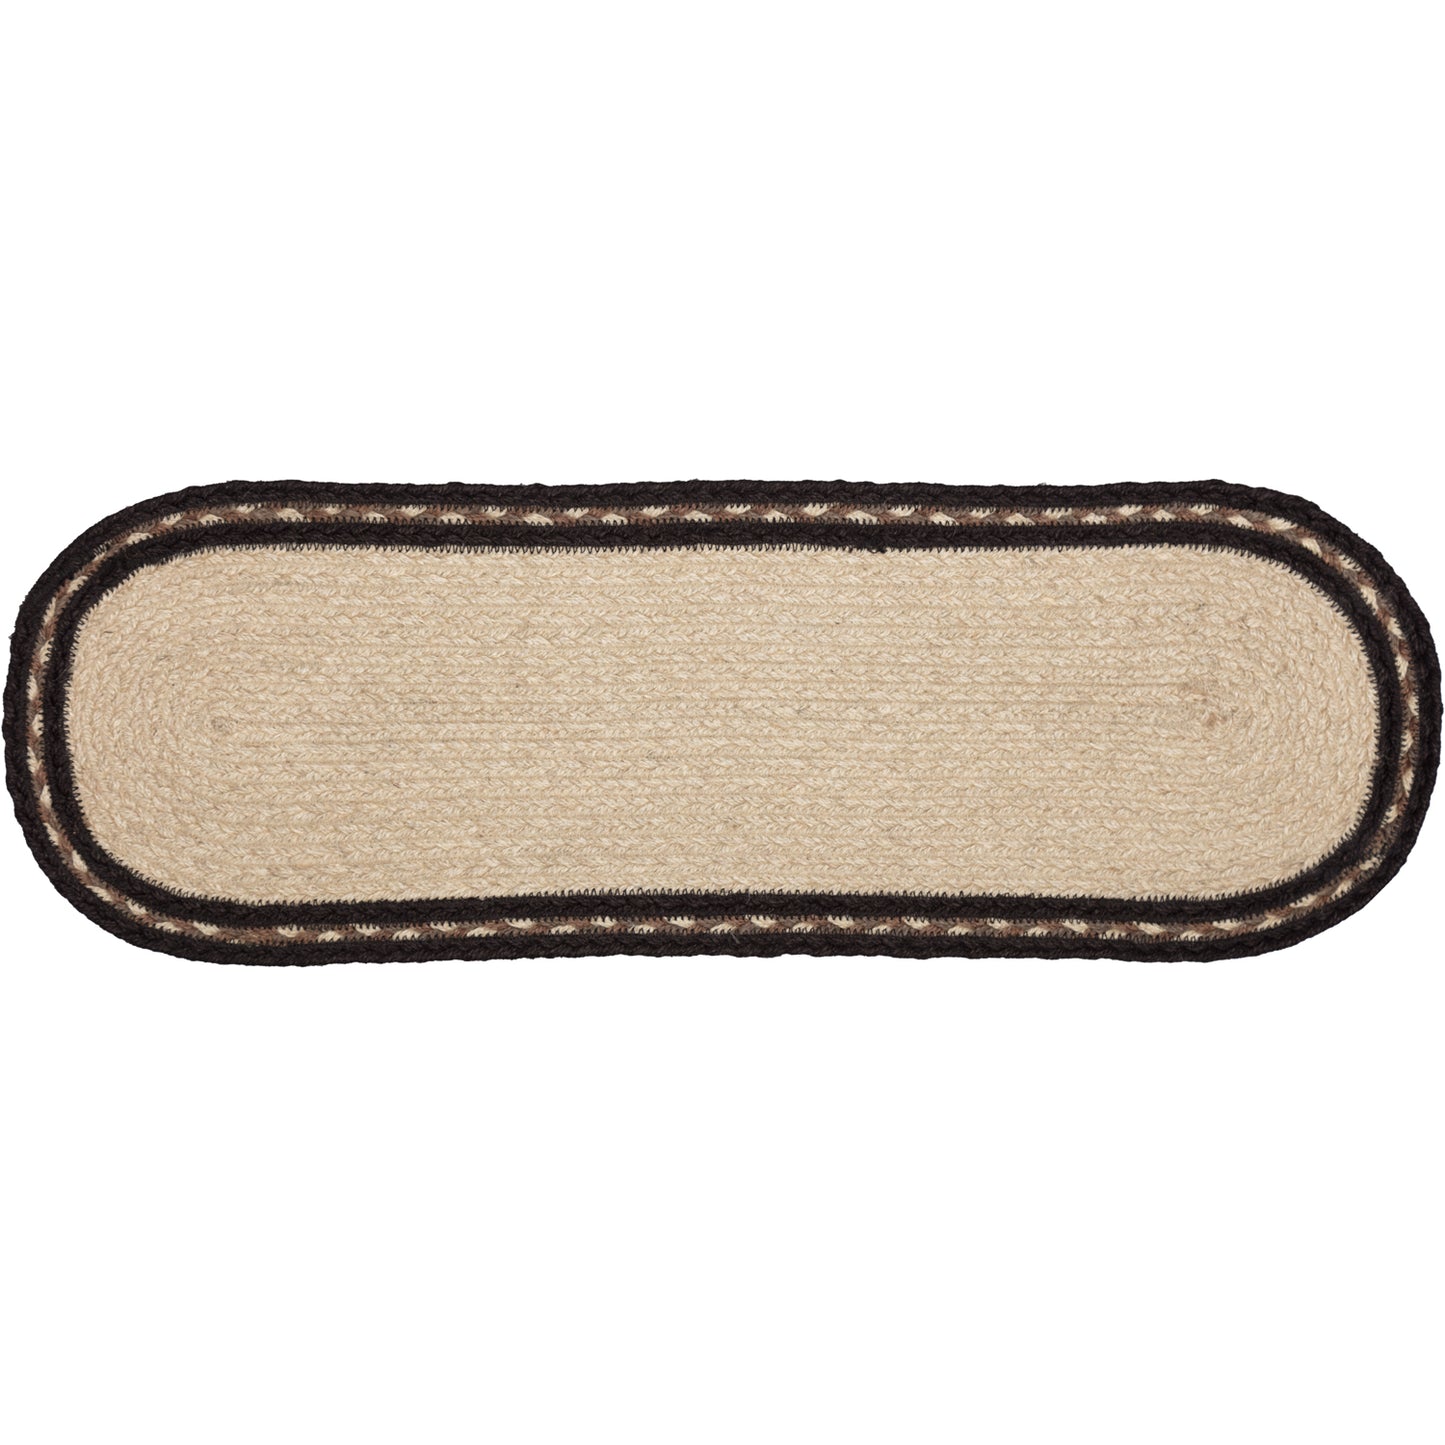 45735-Sawyer-Mill-Charcoal-Creme-Farmhouse-Jute-Oval-Runner-8x24-image-6